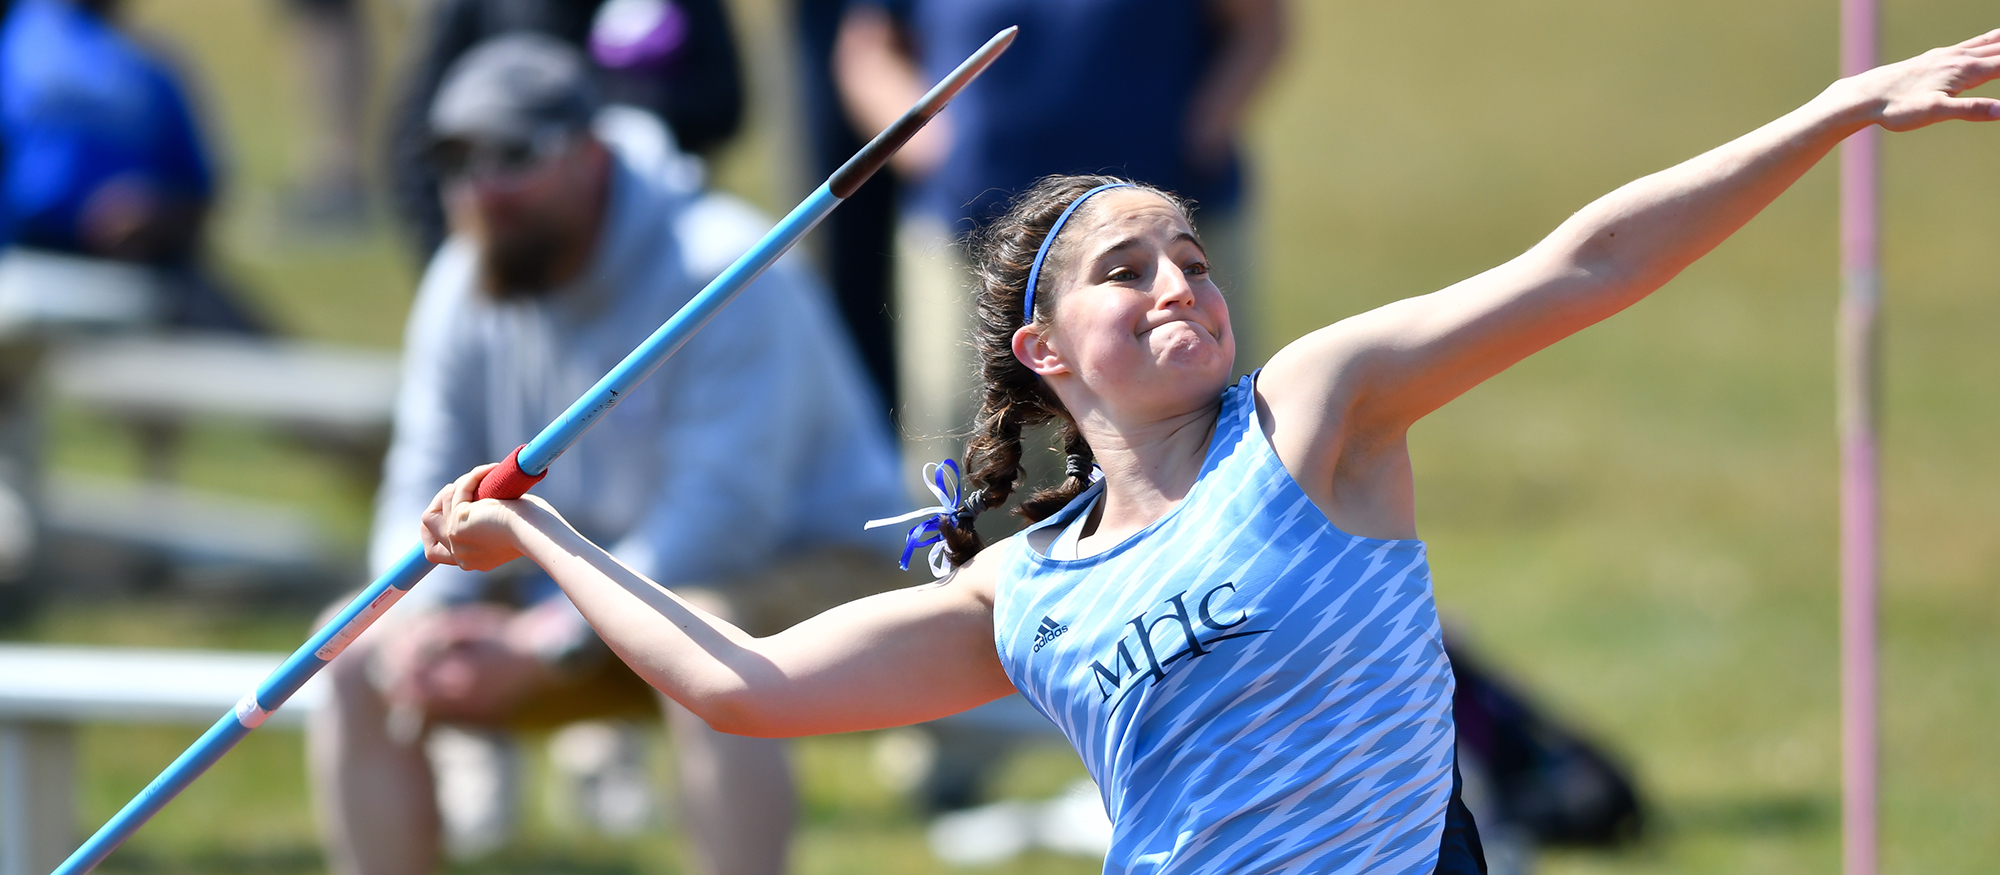 Action photo of Lyons track & field athlete, Ireland Clare Kennedy competing in the javelin.